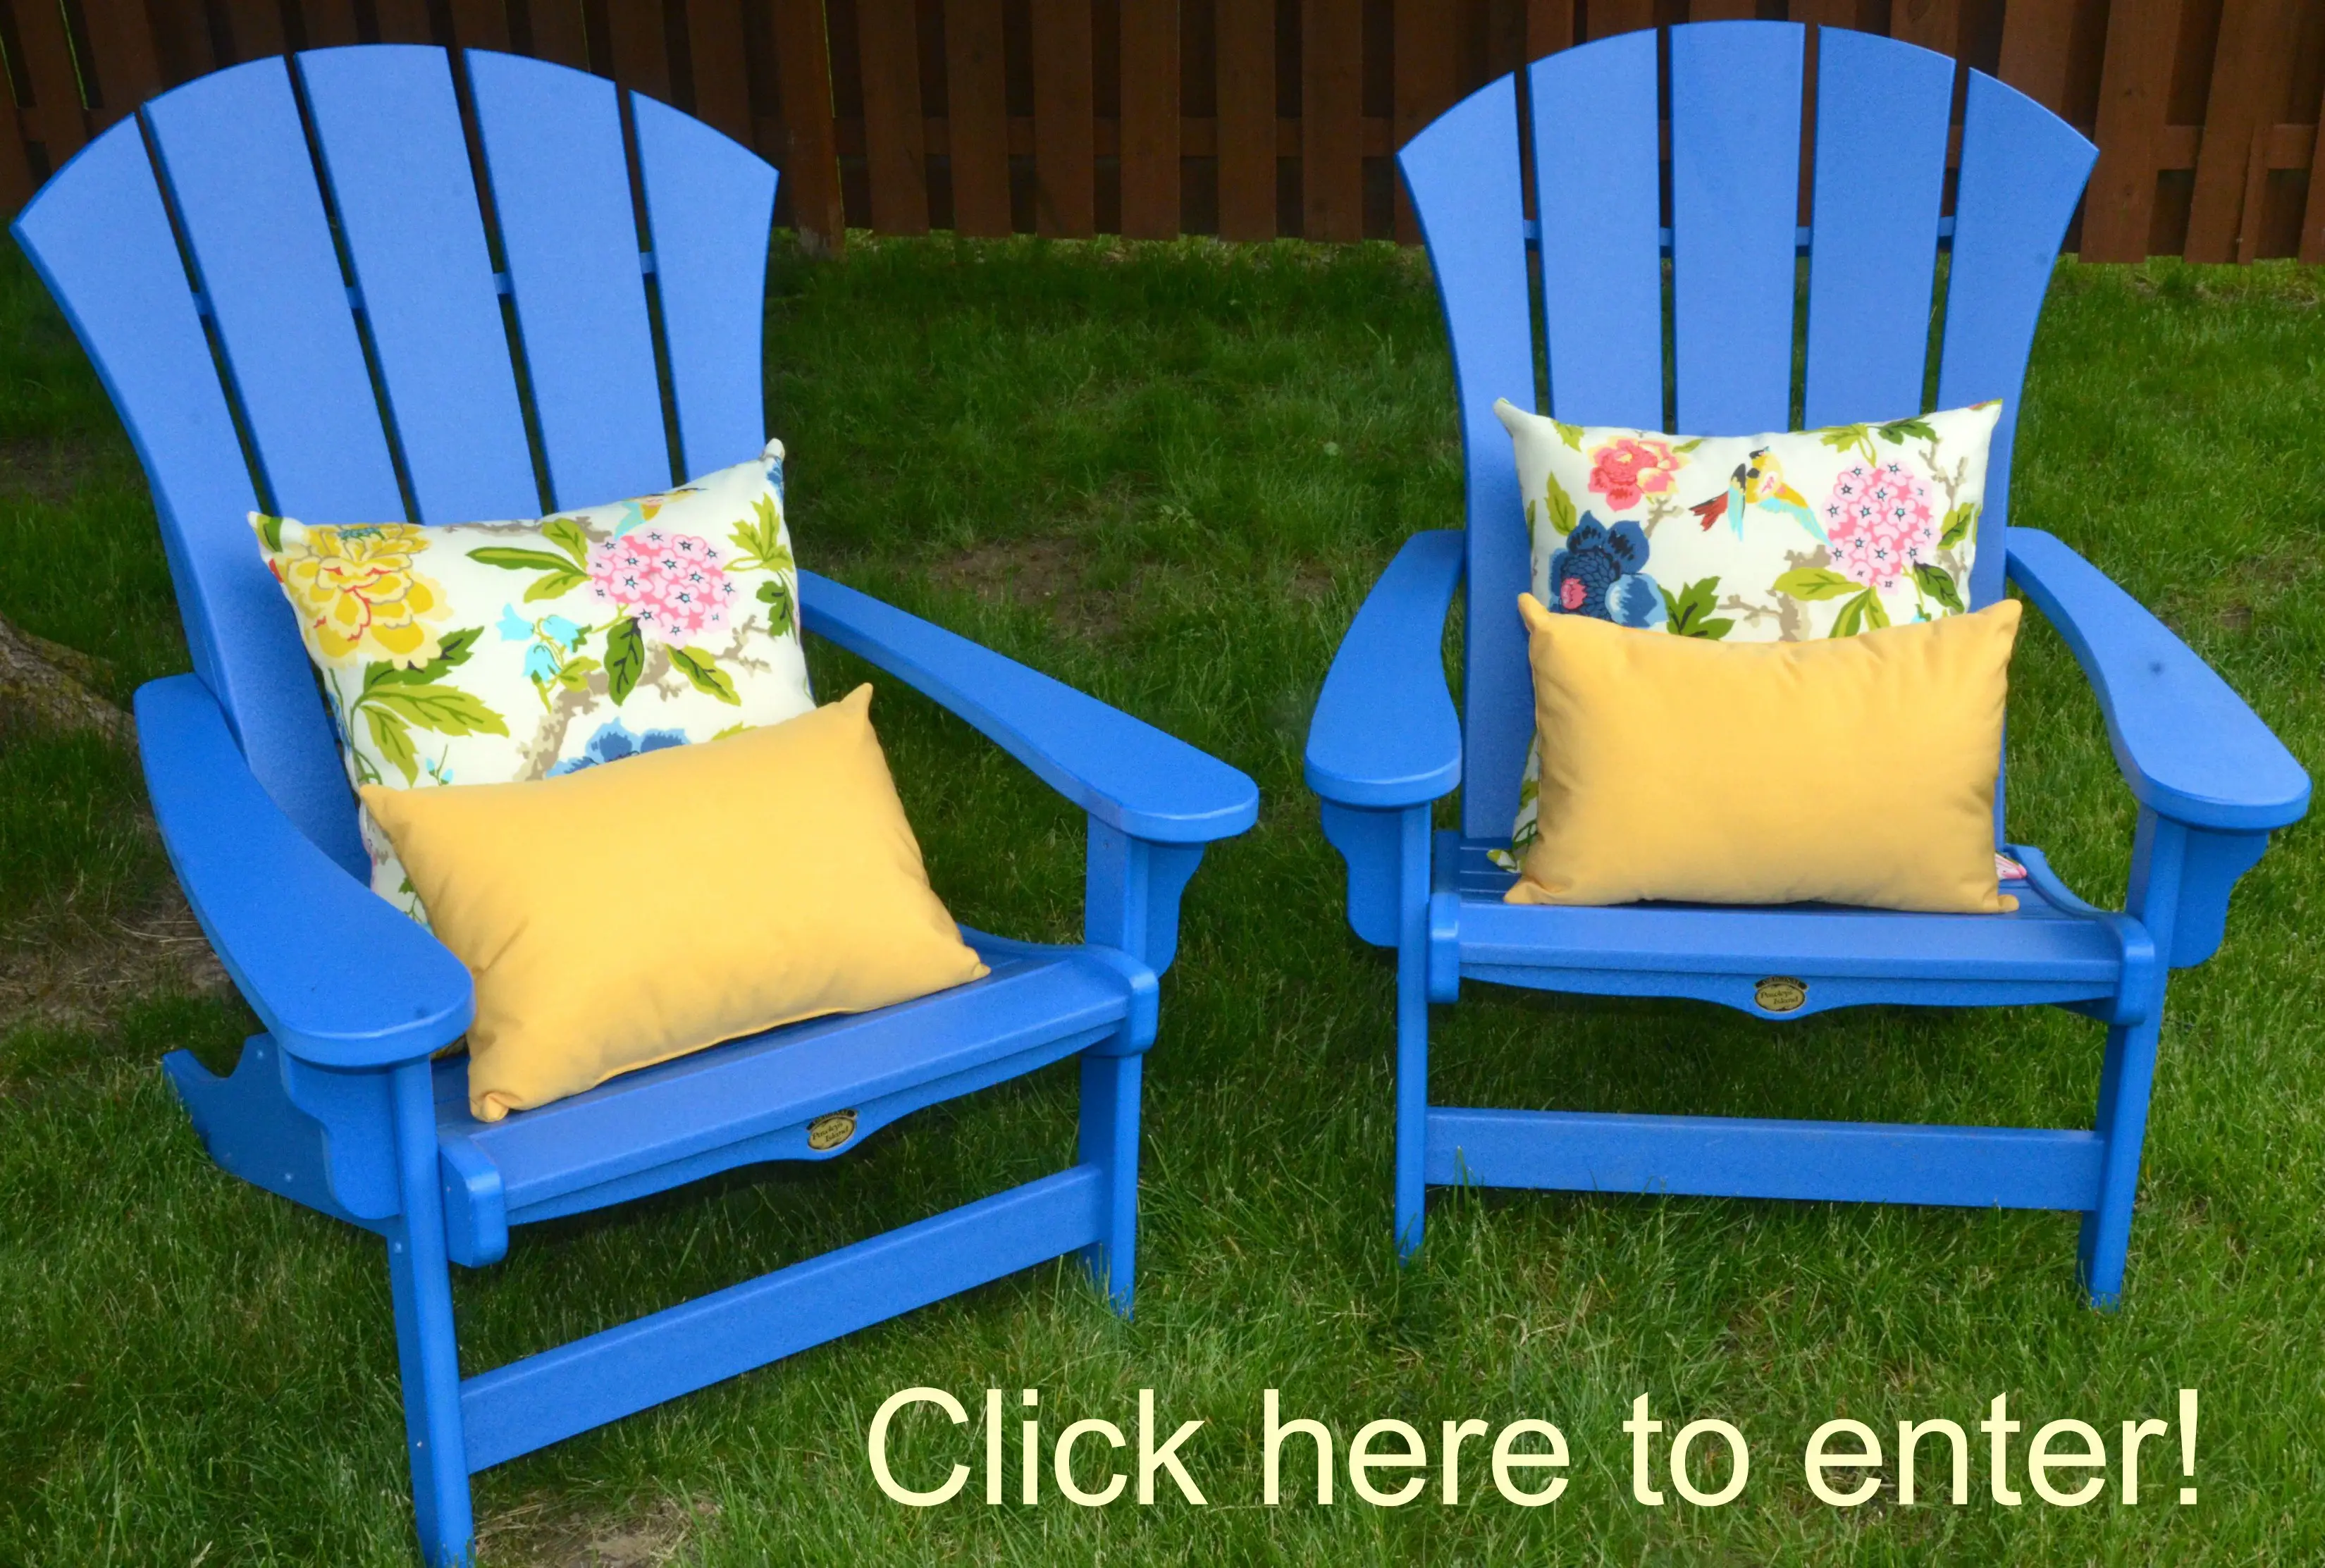 Enter for your chance to win the best outdoor Adirondack chairs you’ll ever own. Made out of Poly Wood Lumber, the Pawleys Island Adirondack Chair Set will last a lifetime.